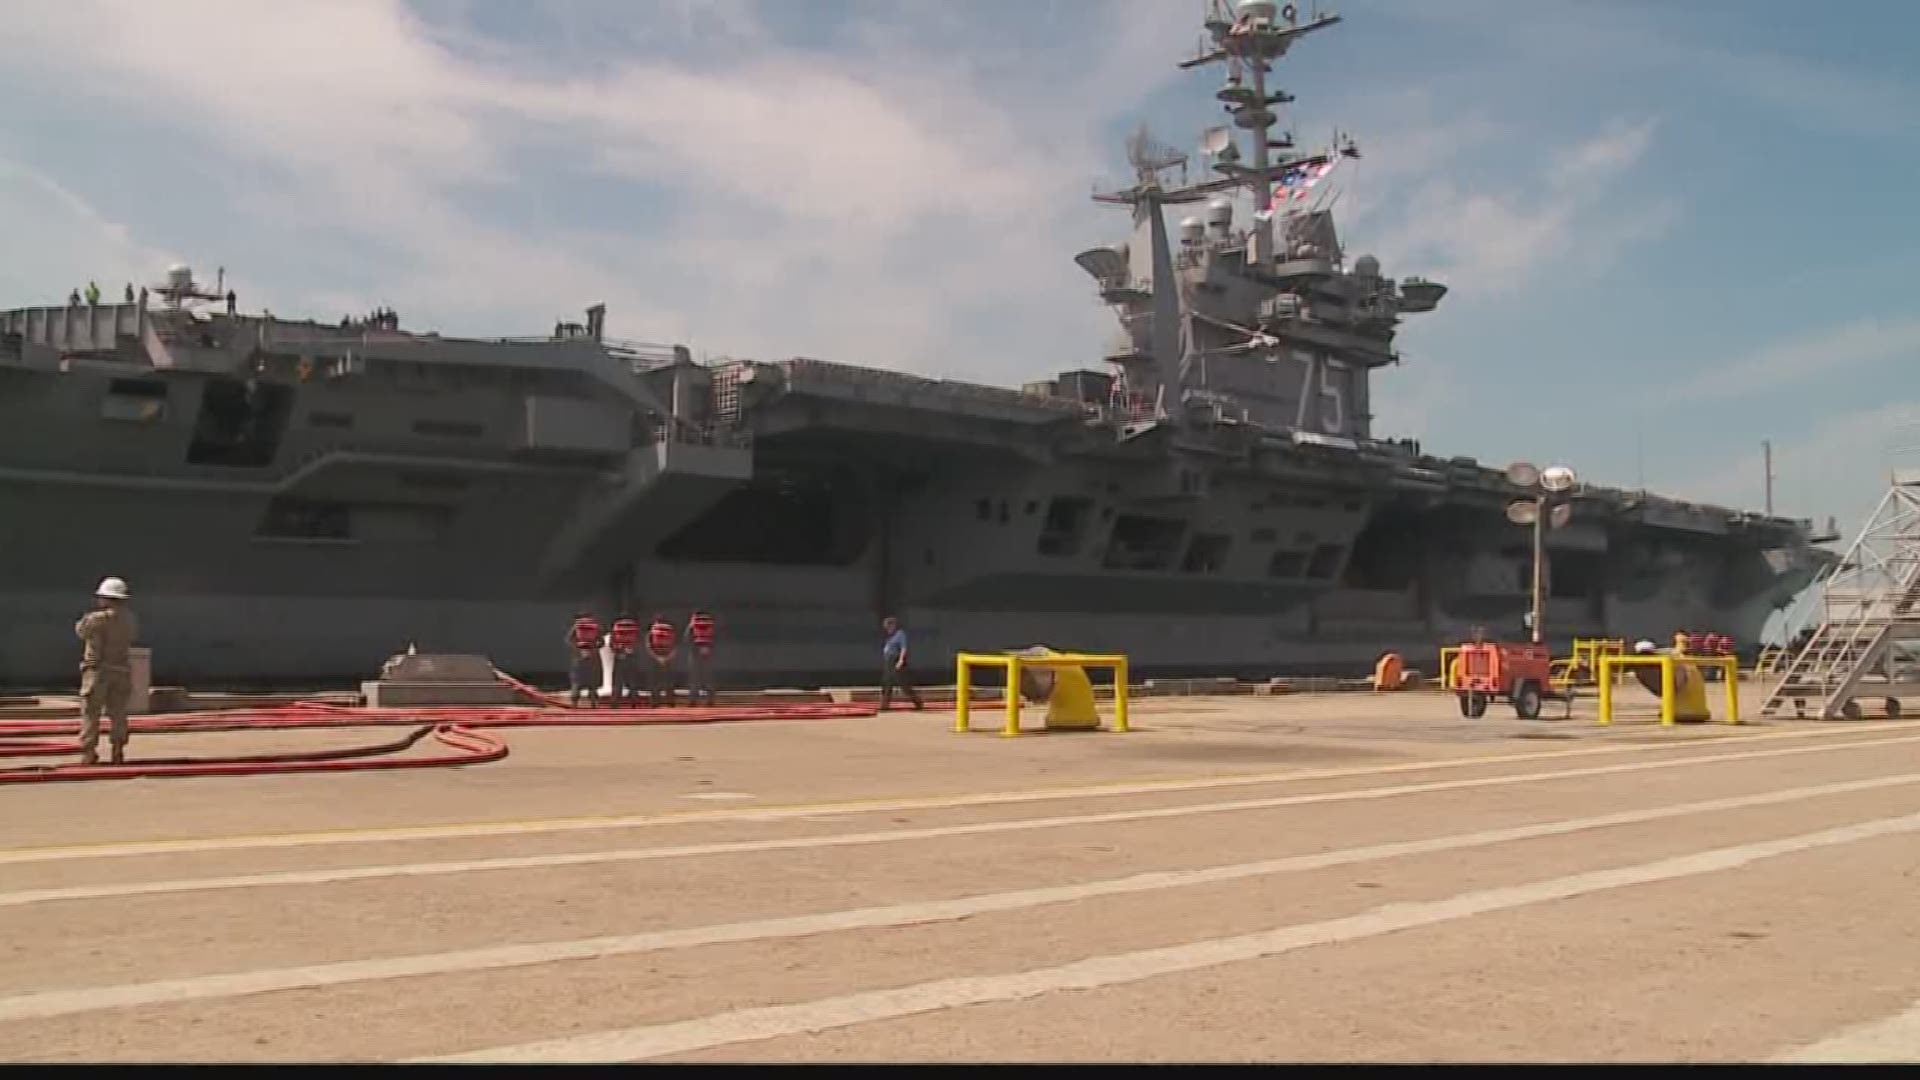 After ten months on the sidelines, the USS Harry S. Truman is one step closer to returning to the fight Tuesday night.